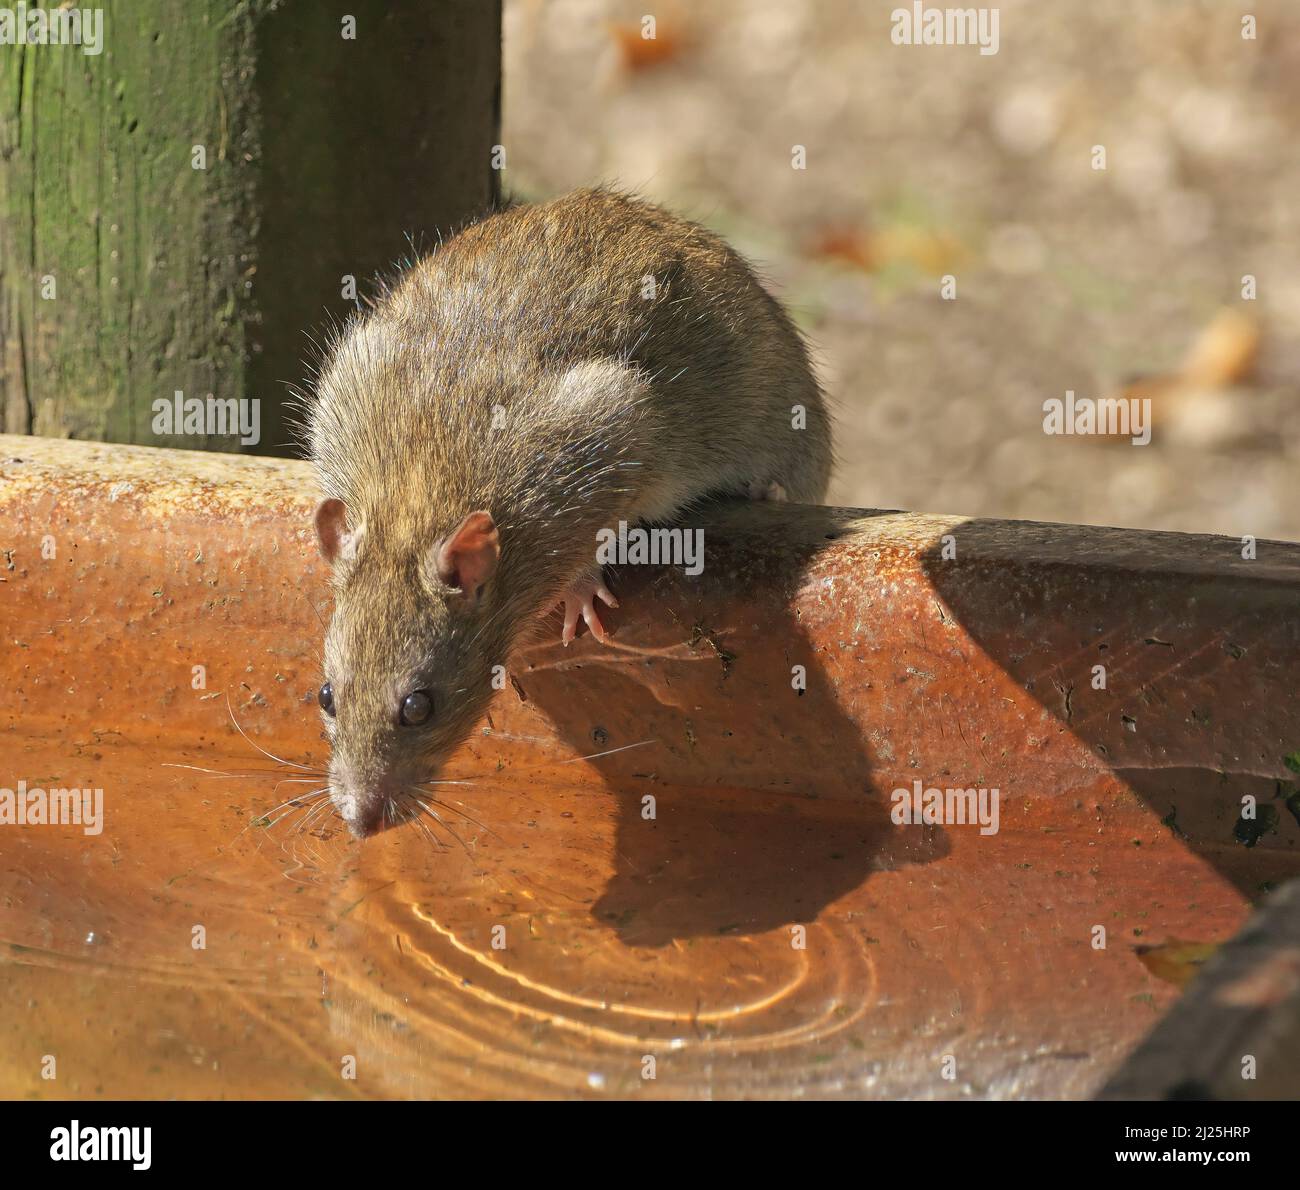 A Norway Rat (Rattus norvegicus) drinks from a water trough in a cattle pasture. Austria Stock Photo